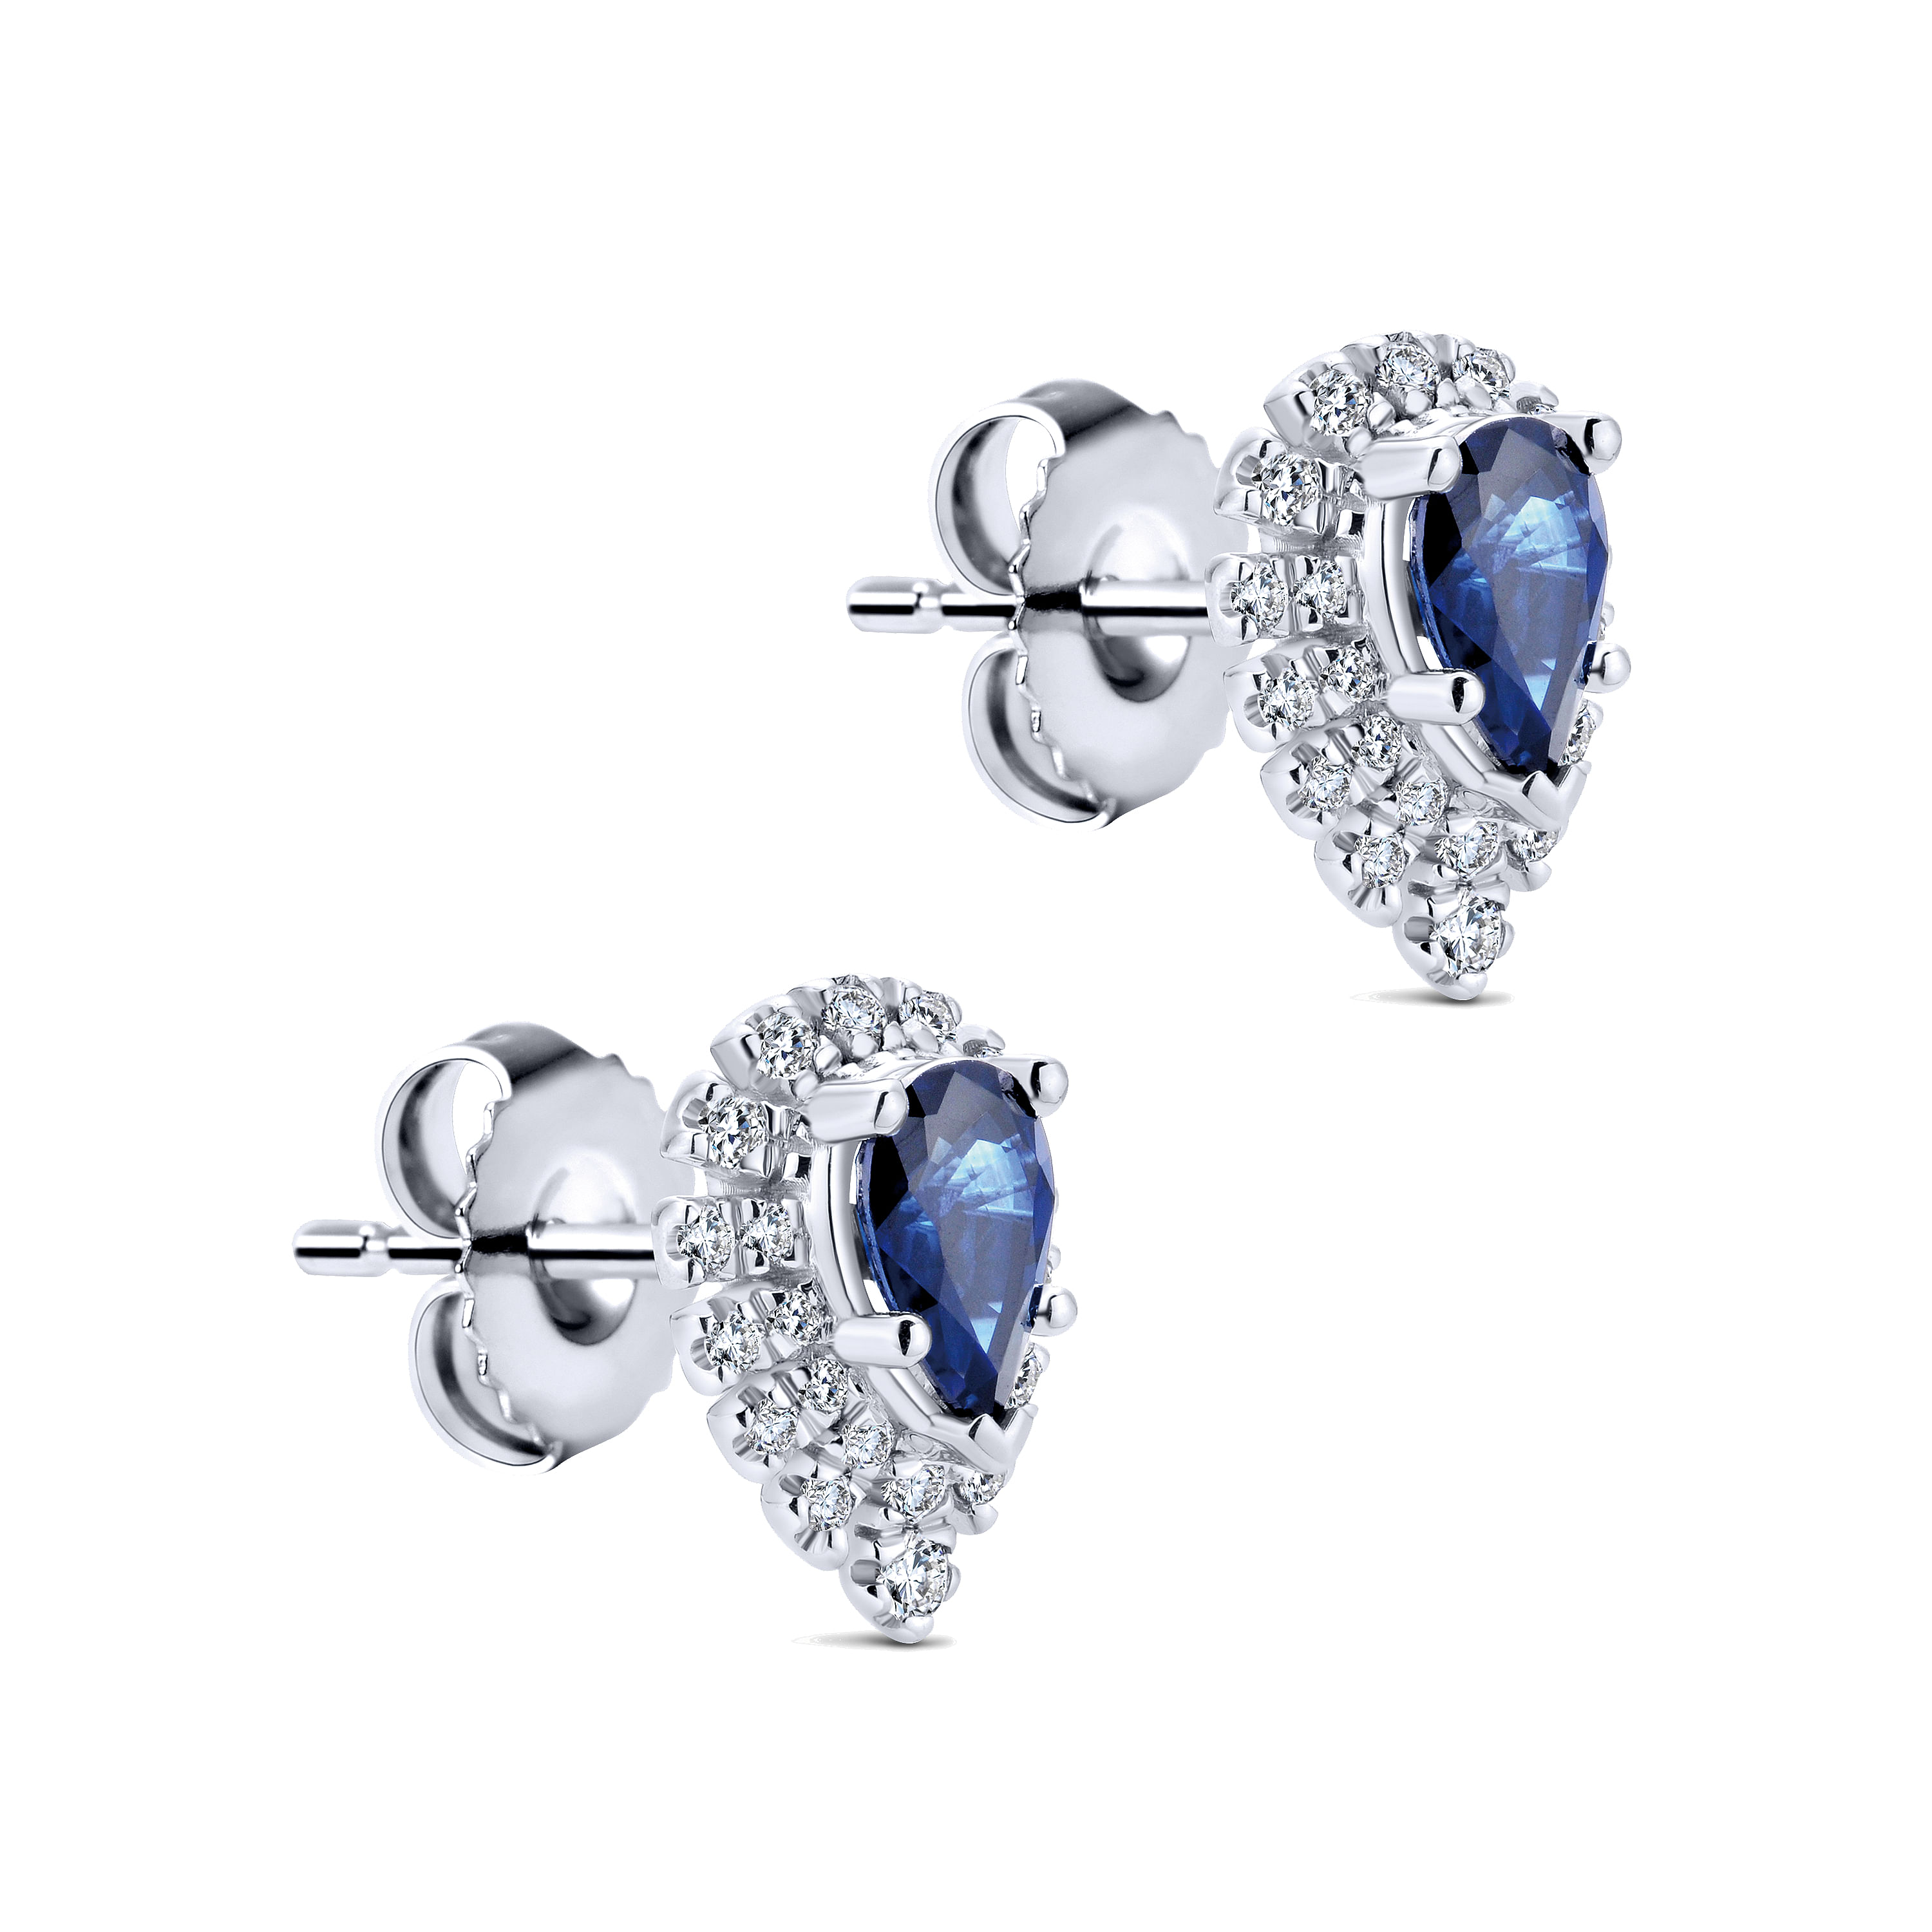 14K White Gold Pear Shaped Halo Diamond and Sapphire Stud Earrings